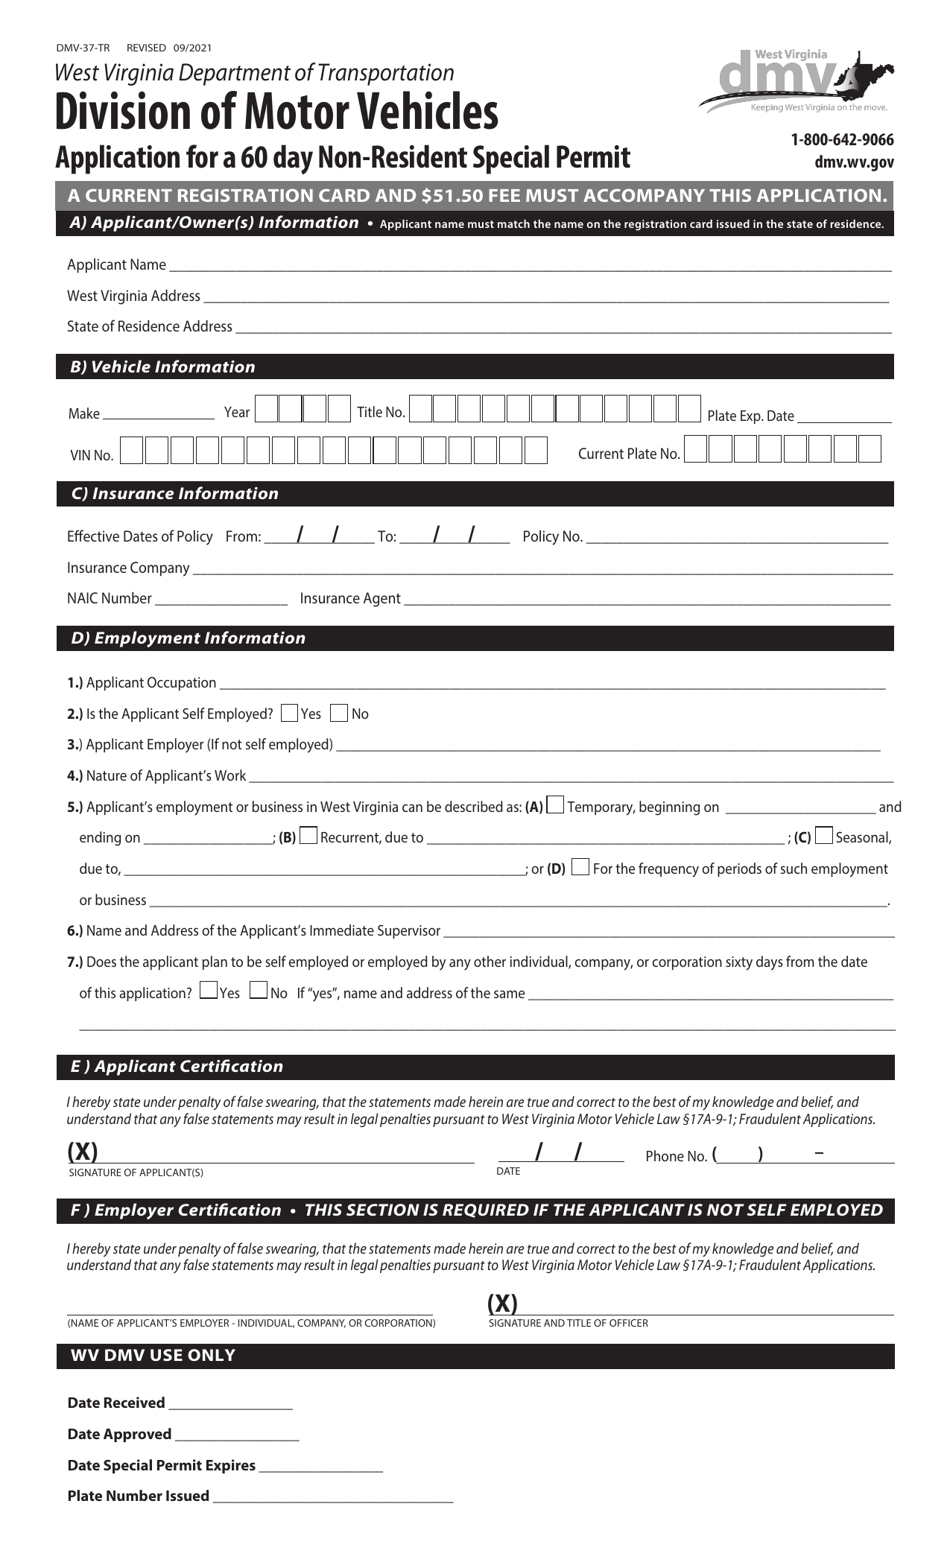 Form DMV-37-TR Application for a 60 Day Non-resident Special Permit - West Virginia, Page 1